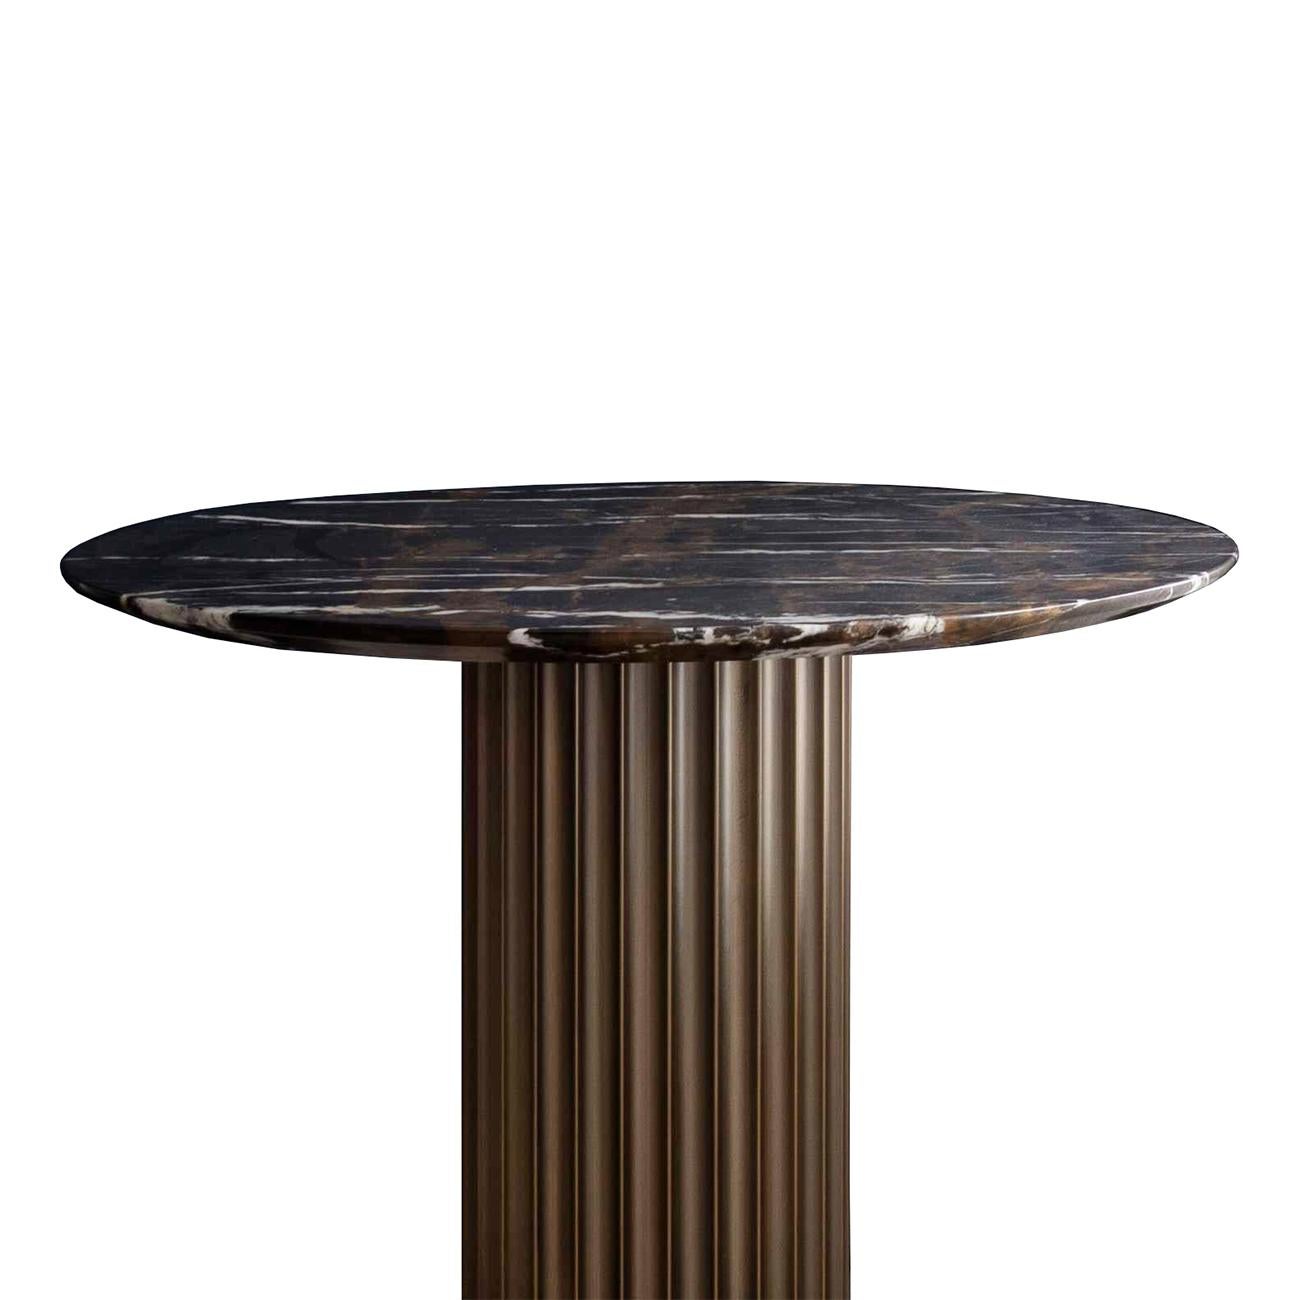 Side table colisee bronze with solid bronze
base and with emperador marble round top.
Measures: Diameter 60cm x height 58cm, price: 3450,00€.
Also available in diameter 50cm x height 58cm, price: 3250,00€.
Also available with glossy gold base with